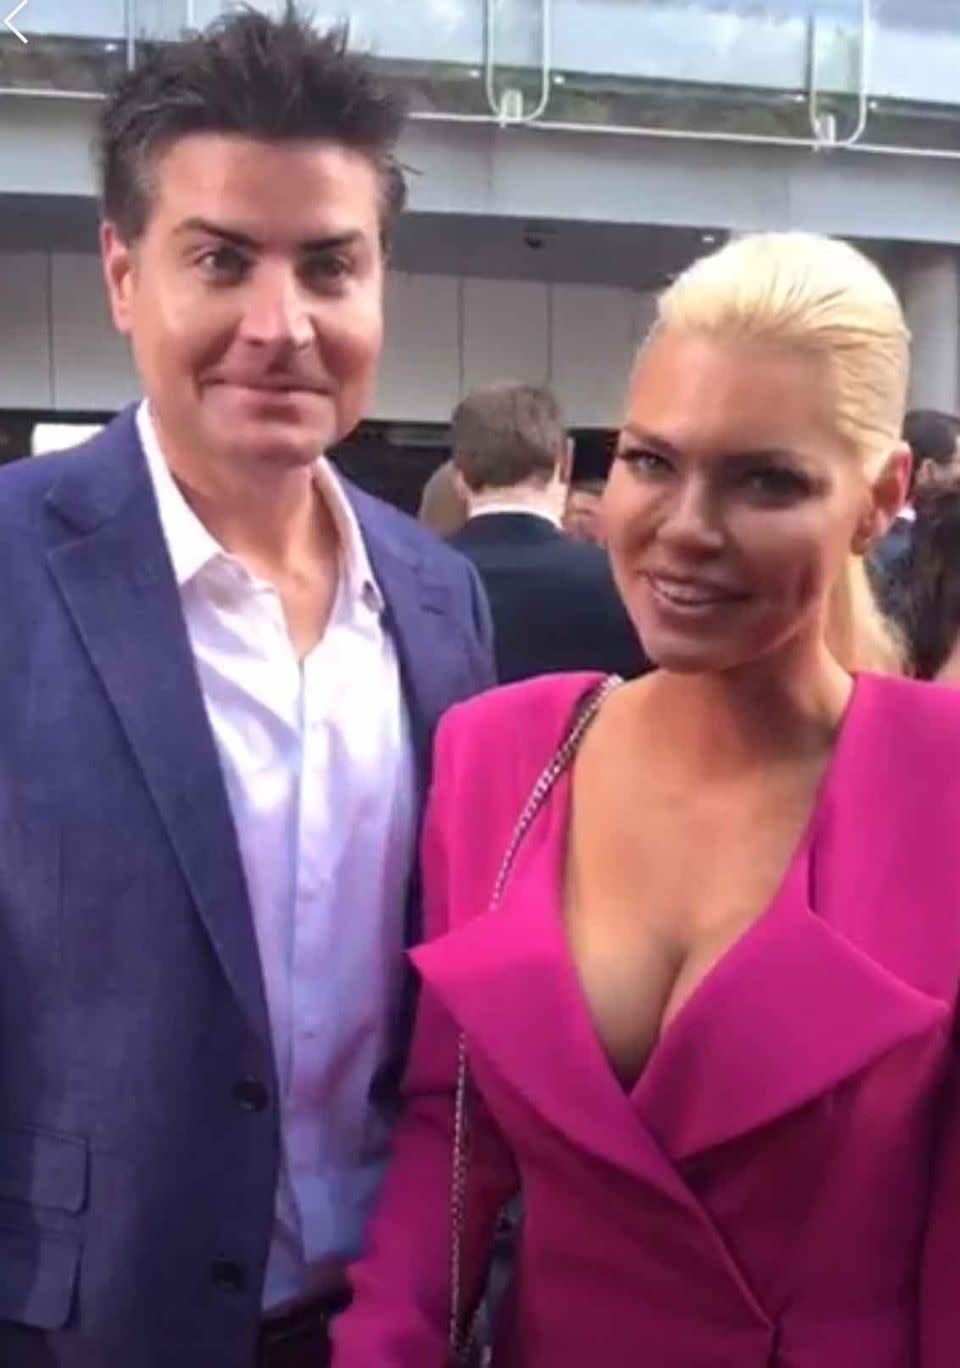 Sophie Monk and Stu Laundy attended the 2017 ARIAs together. Source: Instagram